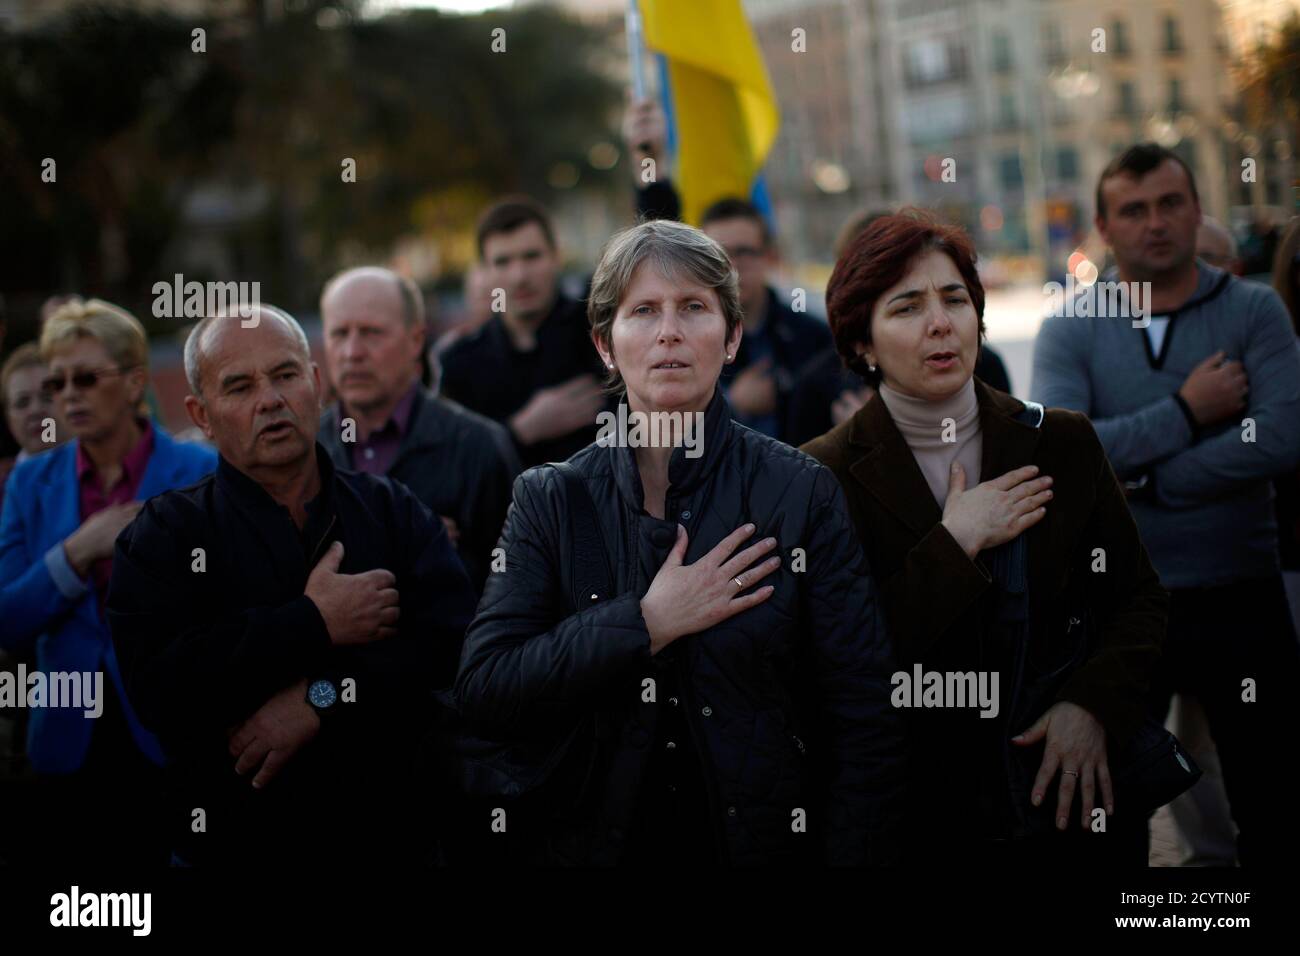 Ukrainians living in Malaga sing the Ukrainian anthem during a protest against Russian President Vladimir Putin and in favor of unity and democratic freedom in Ukraine, in downtown Malaga, southern Spain, March 16, 2014. France on Sunday demanded Russia immediately take measures to reduce 'pointless and dangerous' tensions in Ukraine, calling the secession referendum held in the Crimea region illegal. REUTERS/Jon Nazca (SPAIN - Tags: POLITICS CIVIL UNREST ELECTIONS) Stock Photo